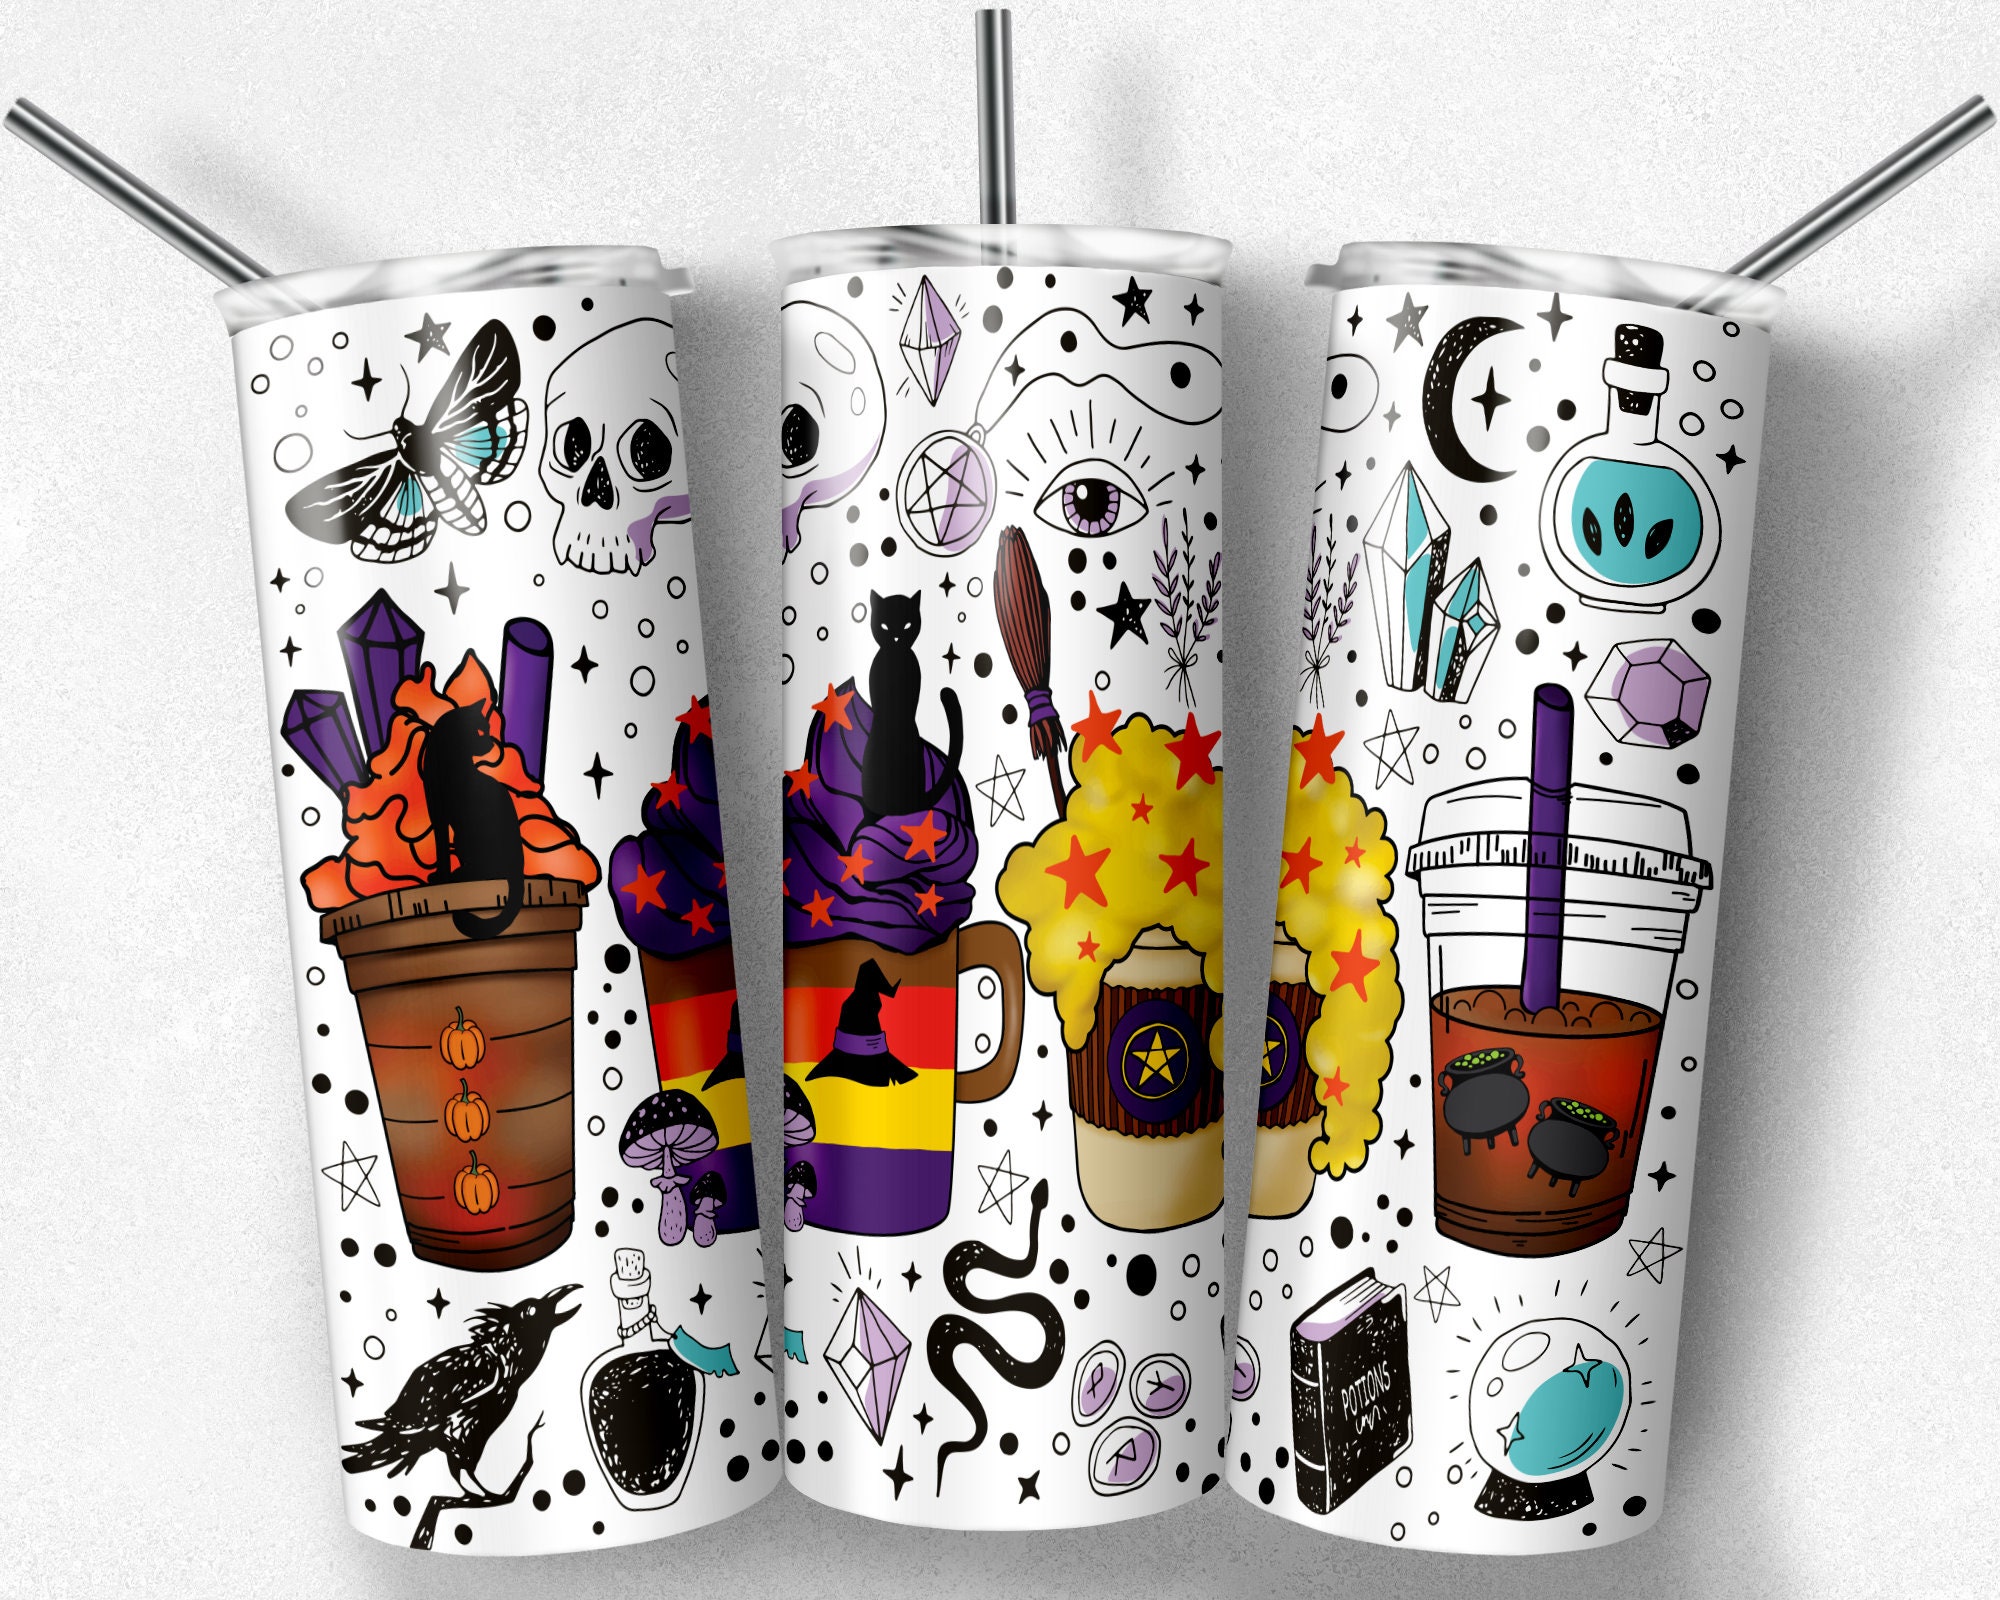 25oz Skinny FROSTED GLASS Sublimation Tumbler – The Tumbler Supply Store